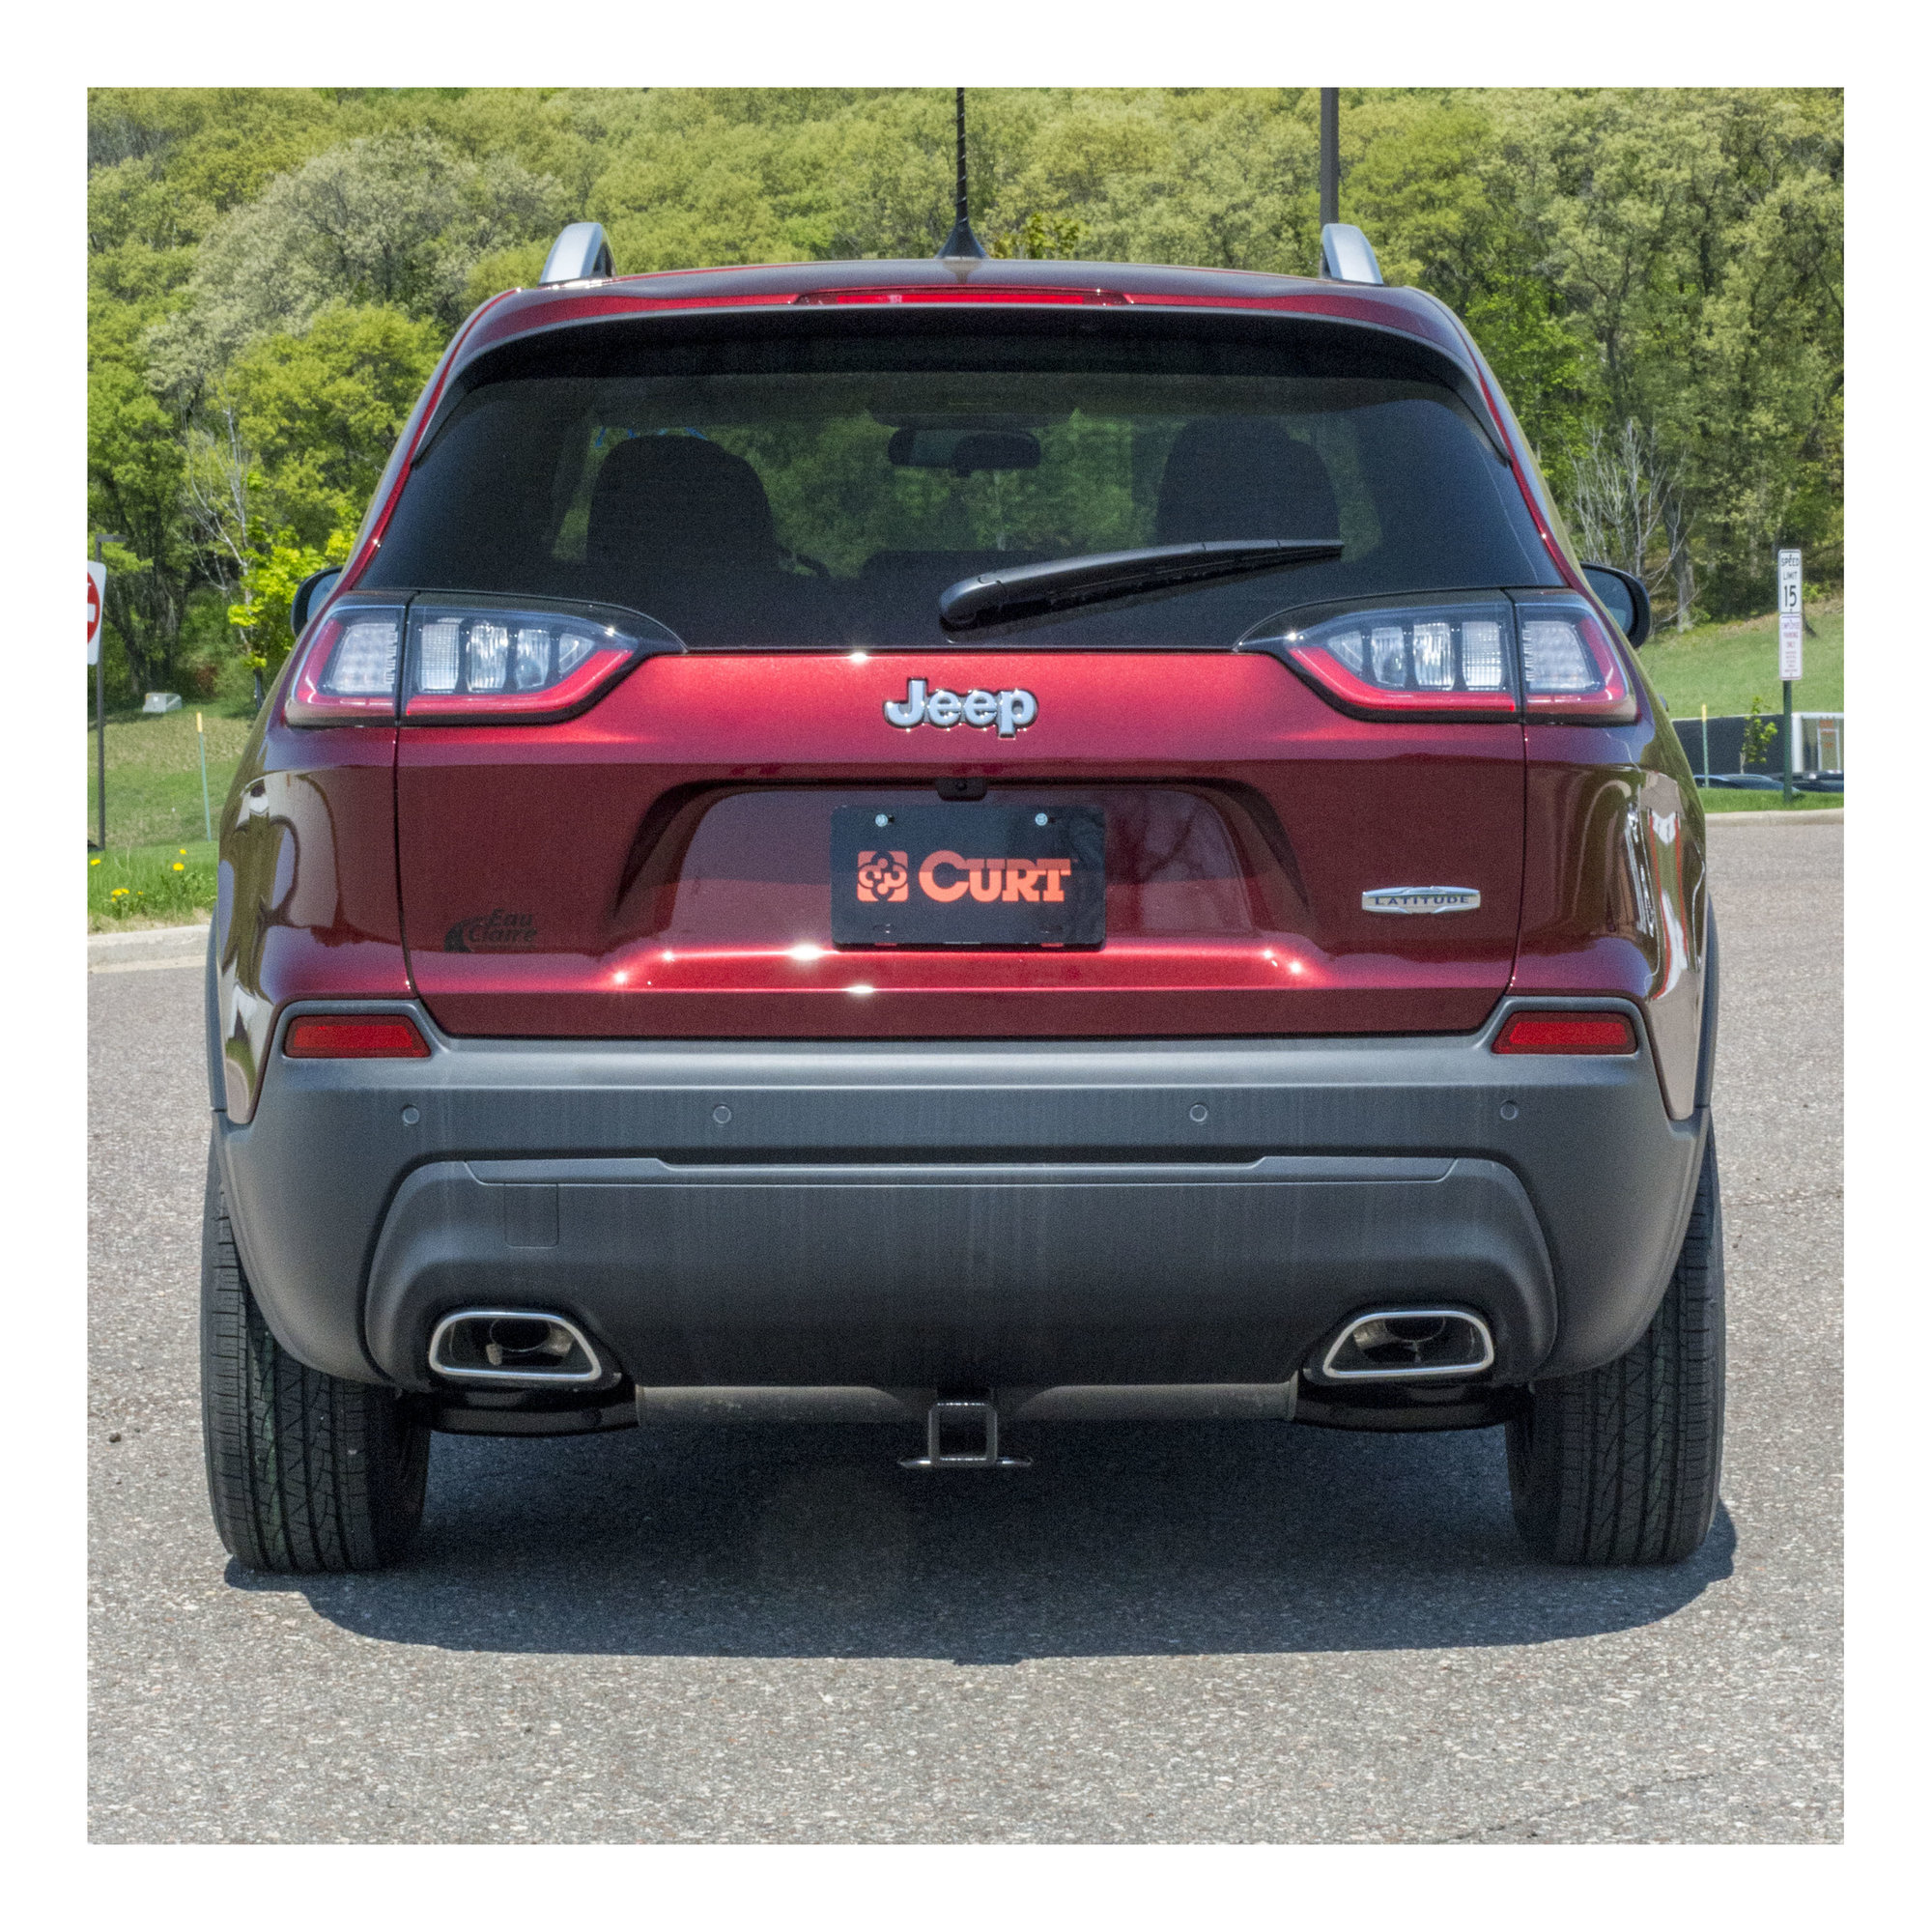 CURT Class III Trailer Hitch with 2" Receiver for 2019 Jeep Cherokee KL Trailer Hitch For 2019 Jeep Cherokee Trailhawk